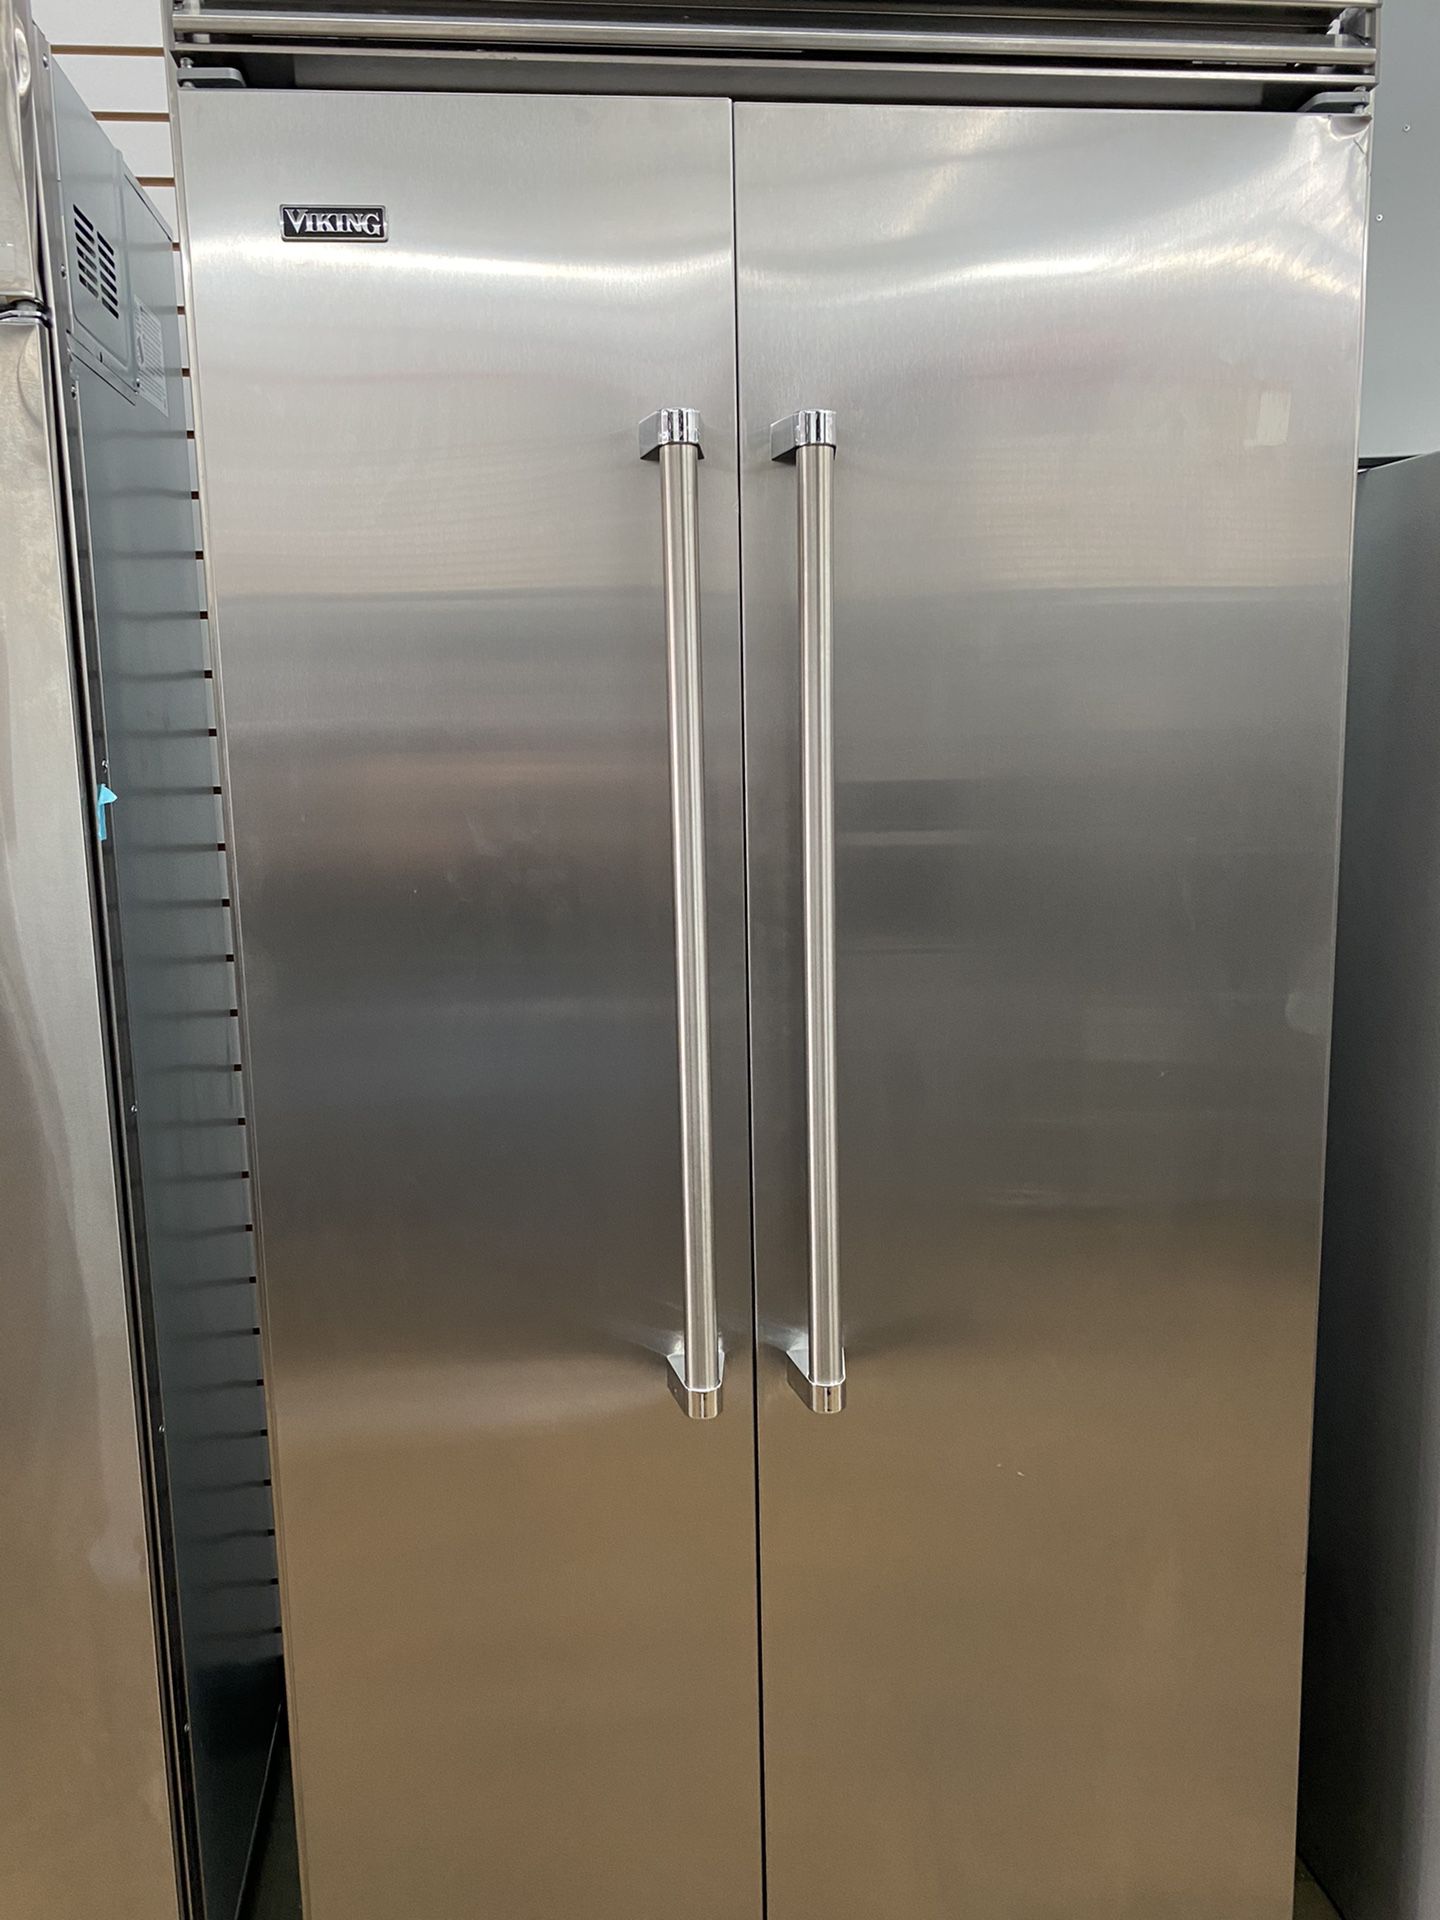 Refrigerator, Viking, kissimmee, kek appliances, $39 down payment, ask for enas